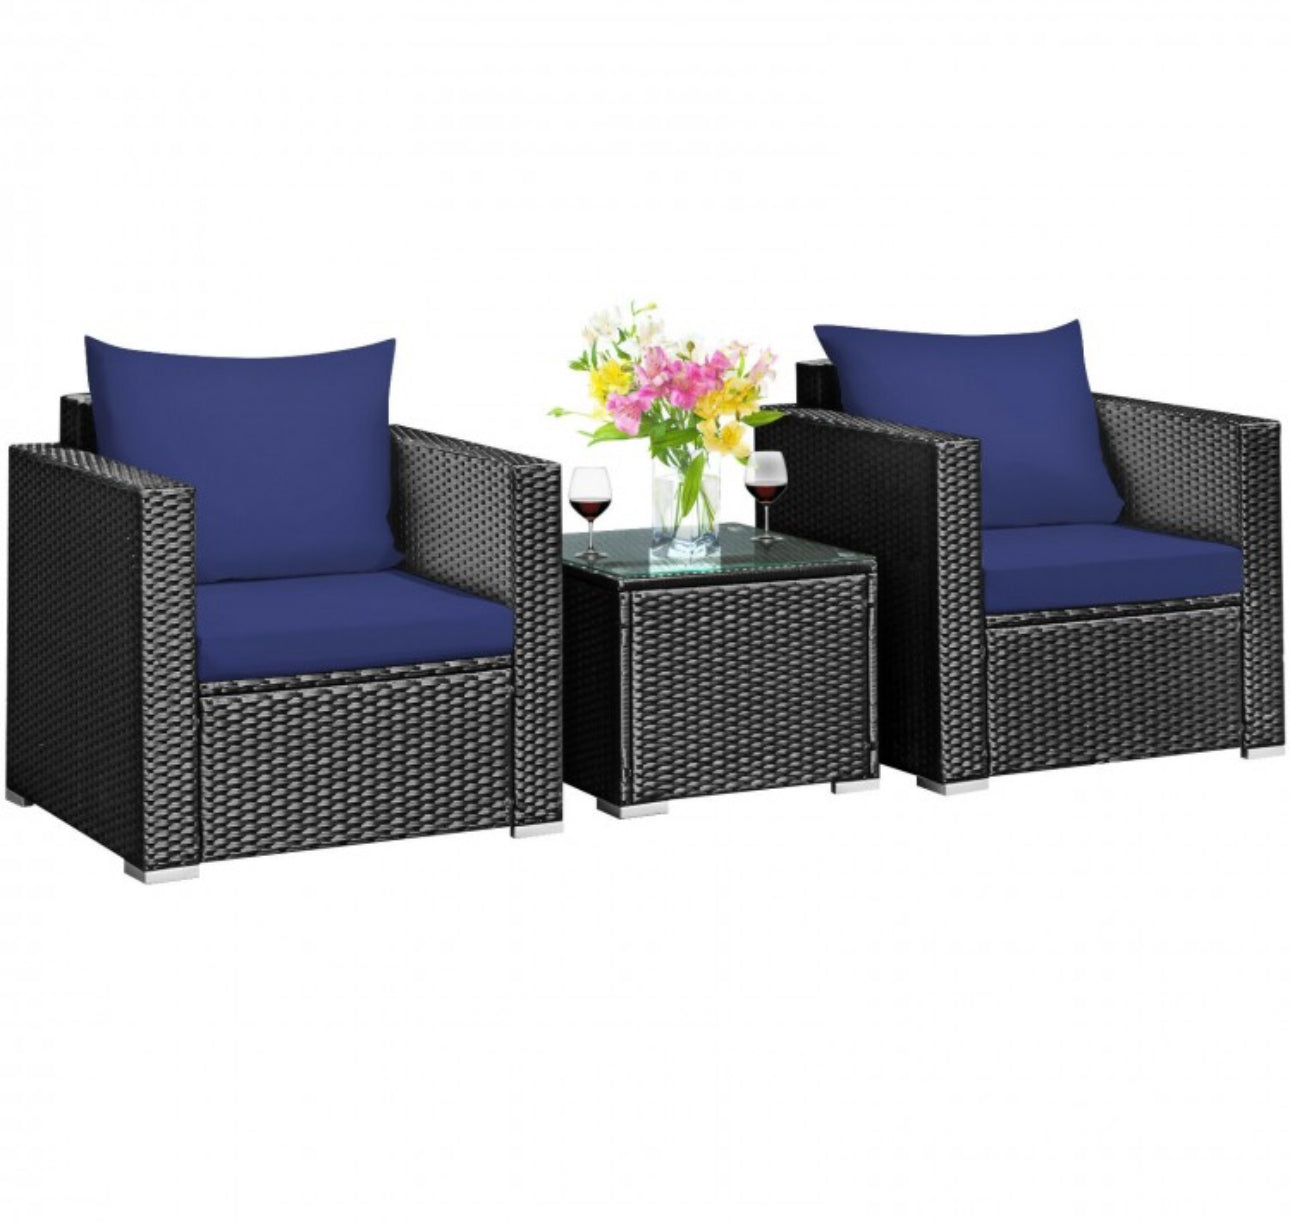 Heavy Duty Steel Frame Modern Beautiful 3-Piece Patio Furniture Wicker Rattan Conversation, Relaxing Set With Thick Comfy Cushions, 5 Colours